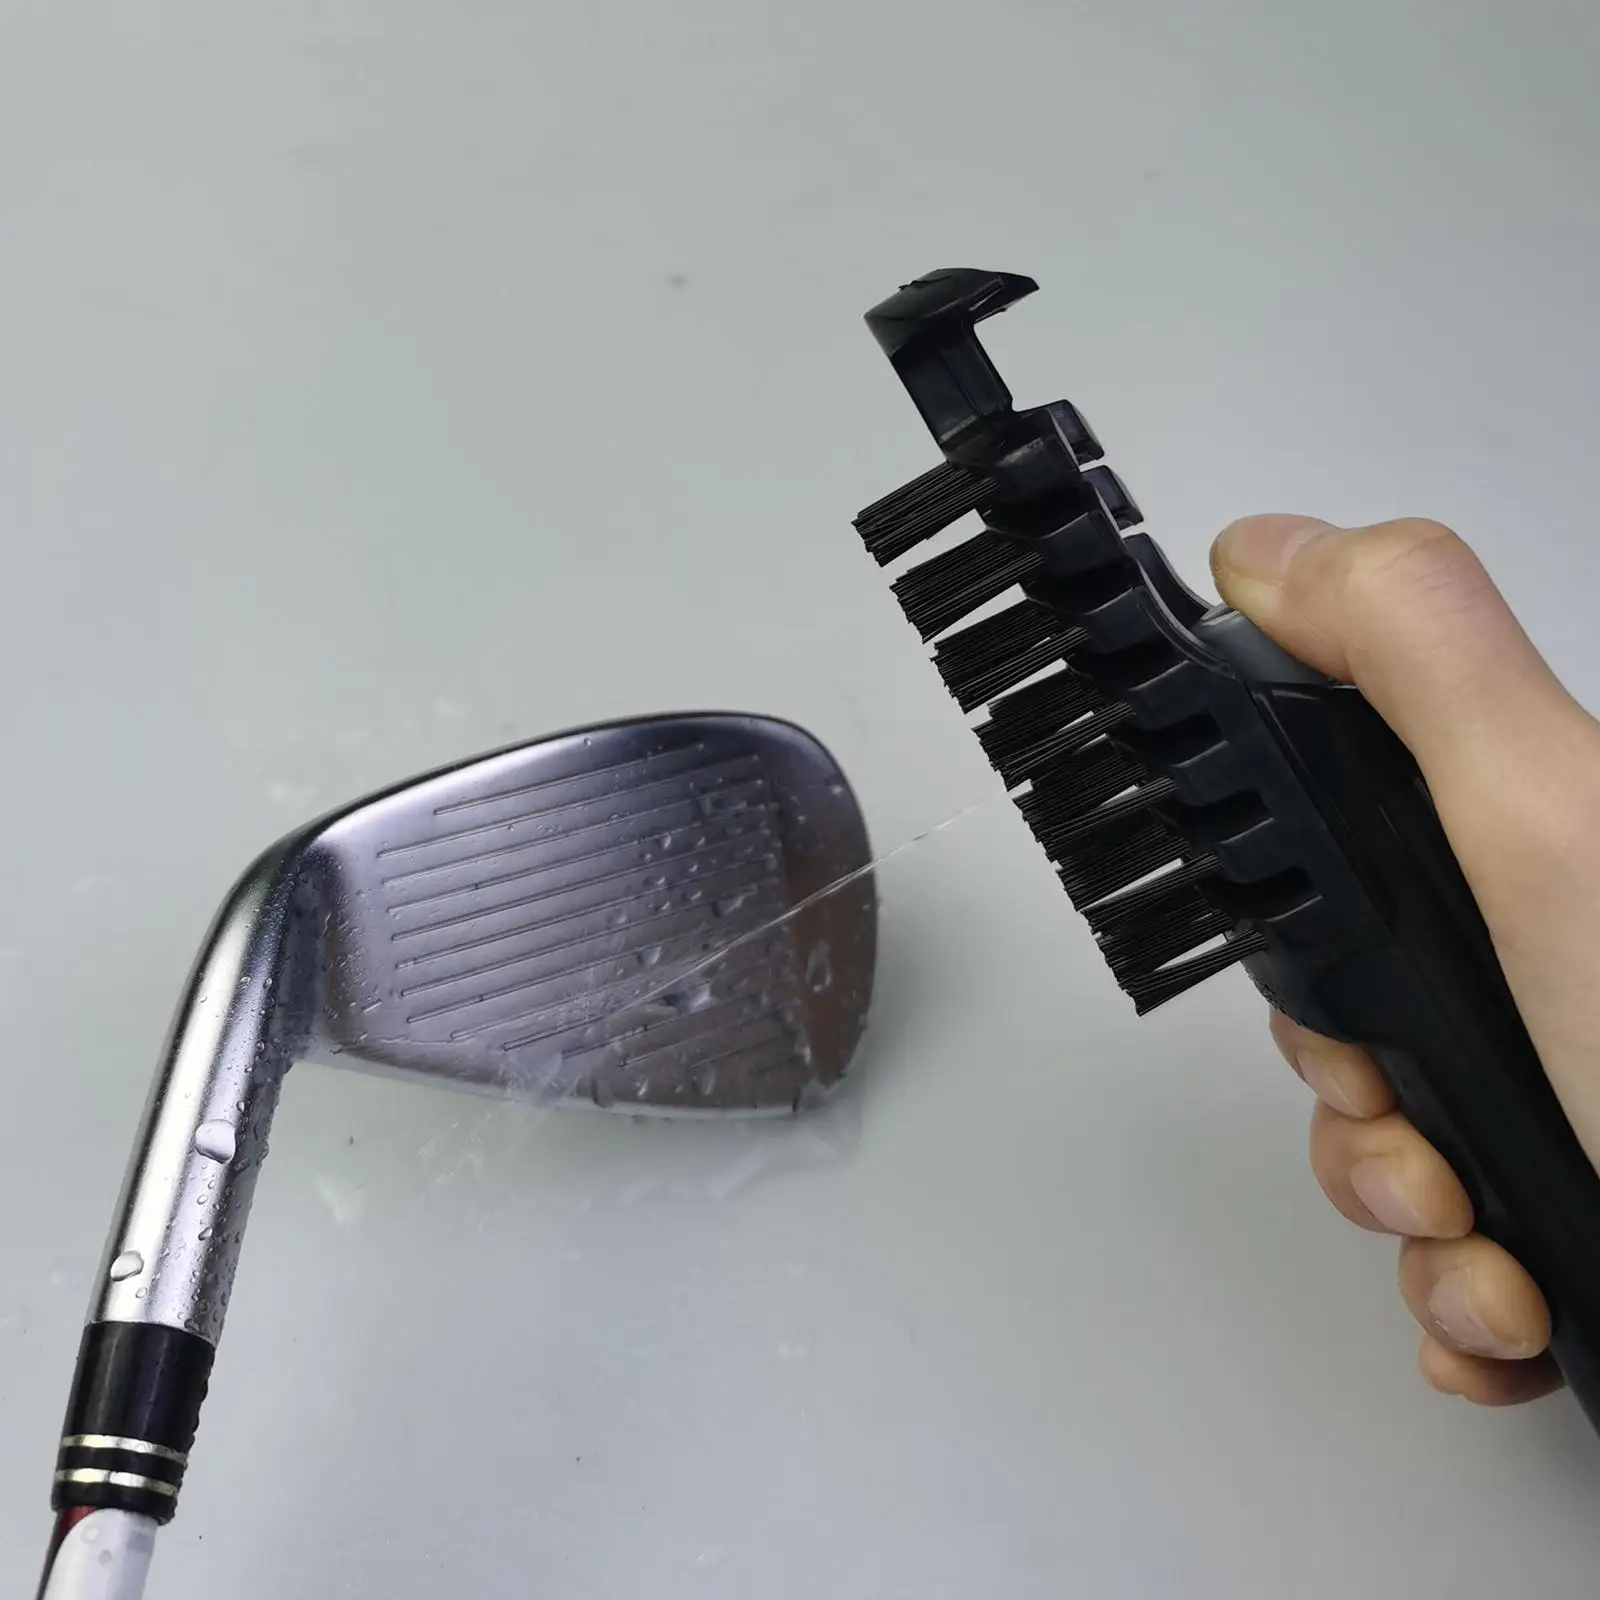  Club Cleaning Kit Brush with Water Container Bottle Groove Cleaner Irons Ball Washing Maintain Tool Washer Accessories